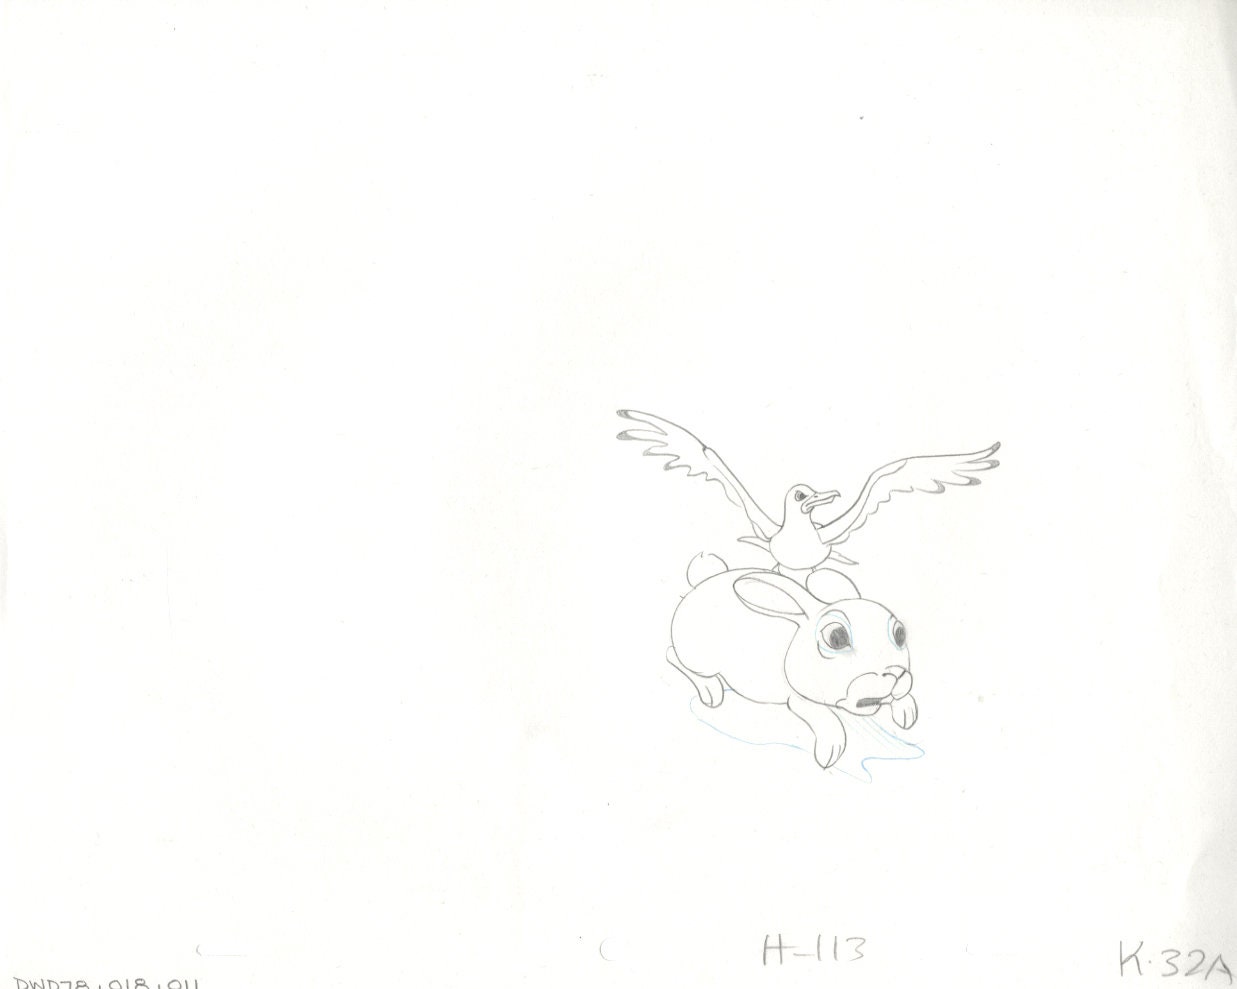 Watership Down 1978 Production Animation Cel Drawing with Linda Jones Enterprise Seal and Certificate of Authenticity 018-11